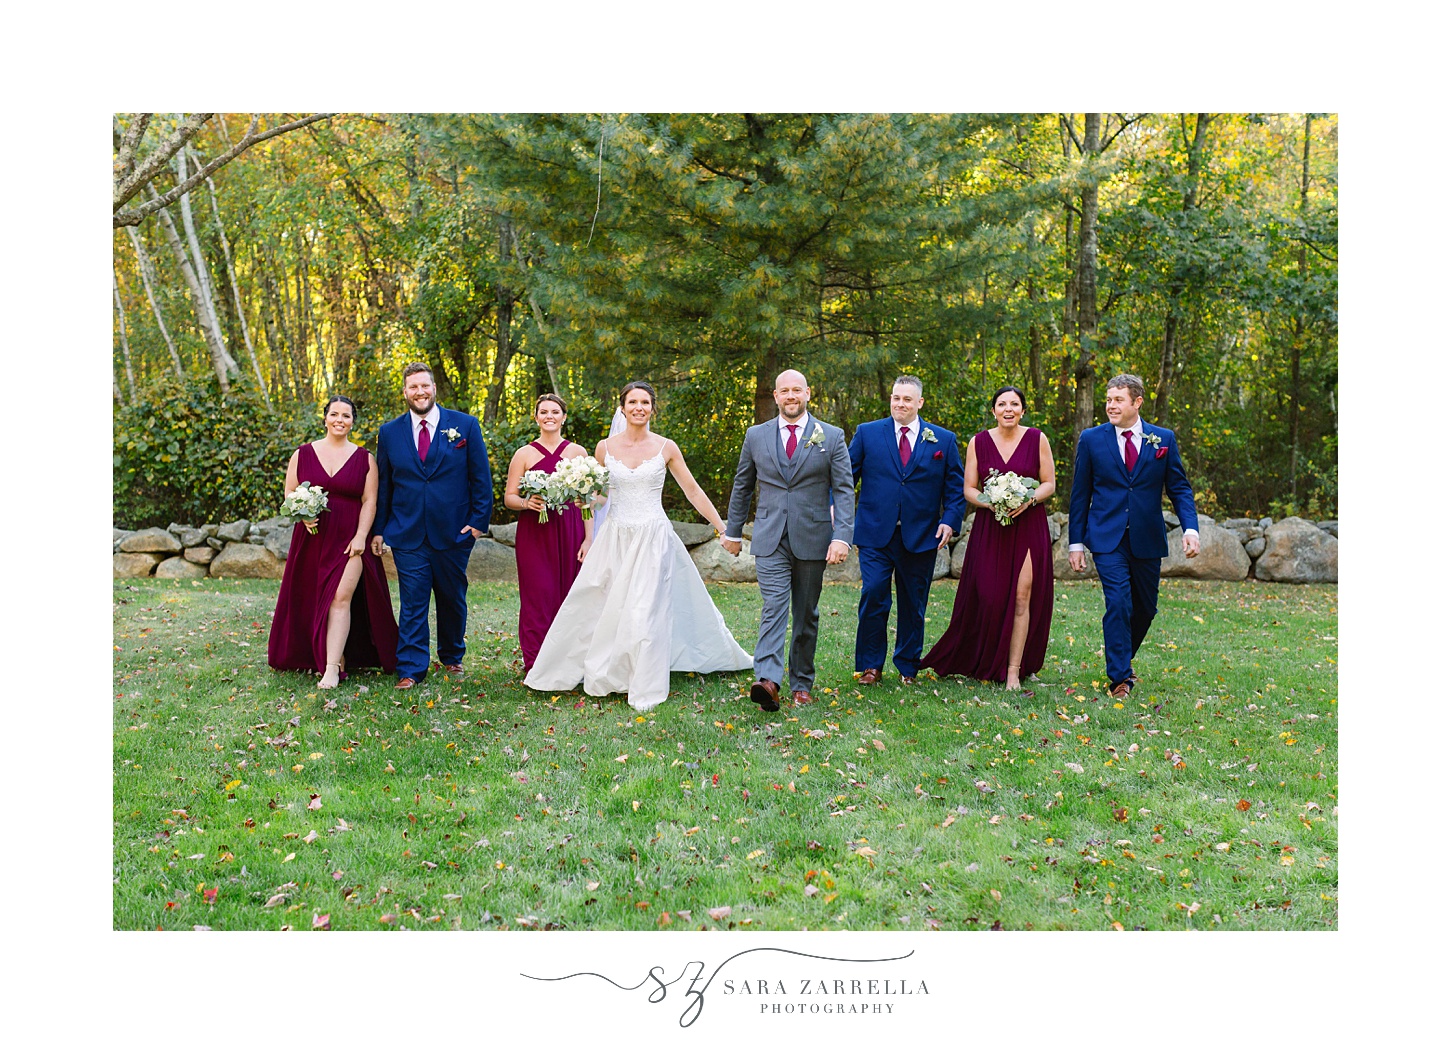 bride and groom walk with bridal party in burgundy gowns and navy suits